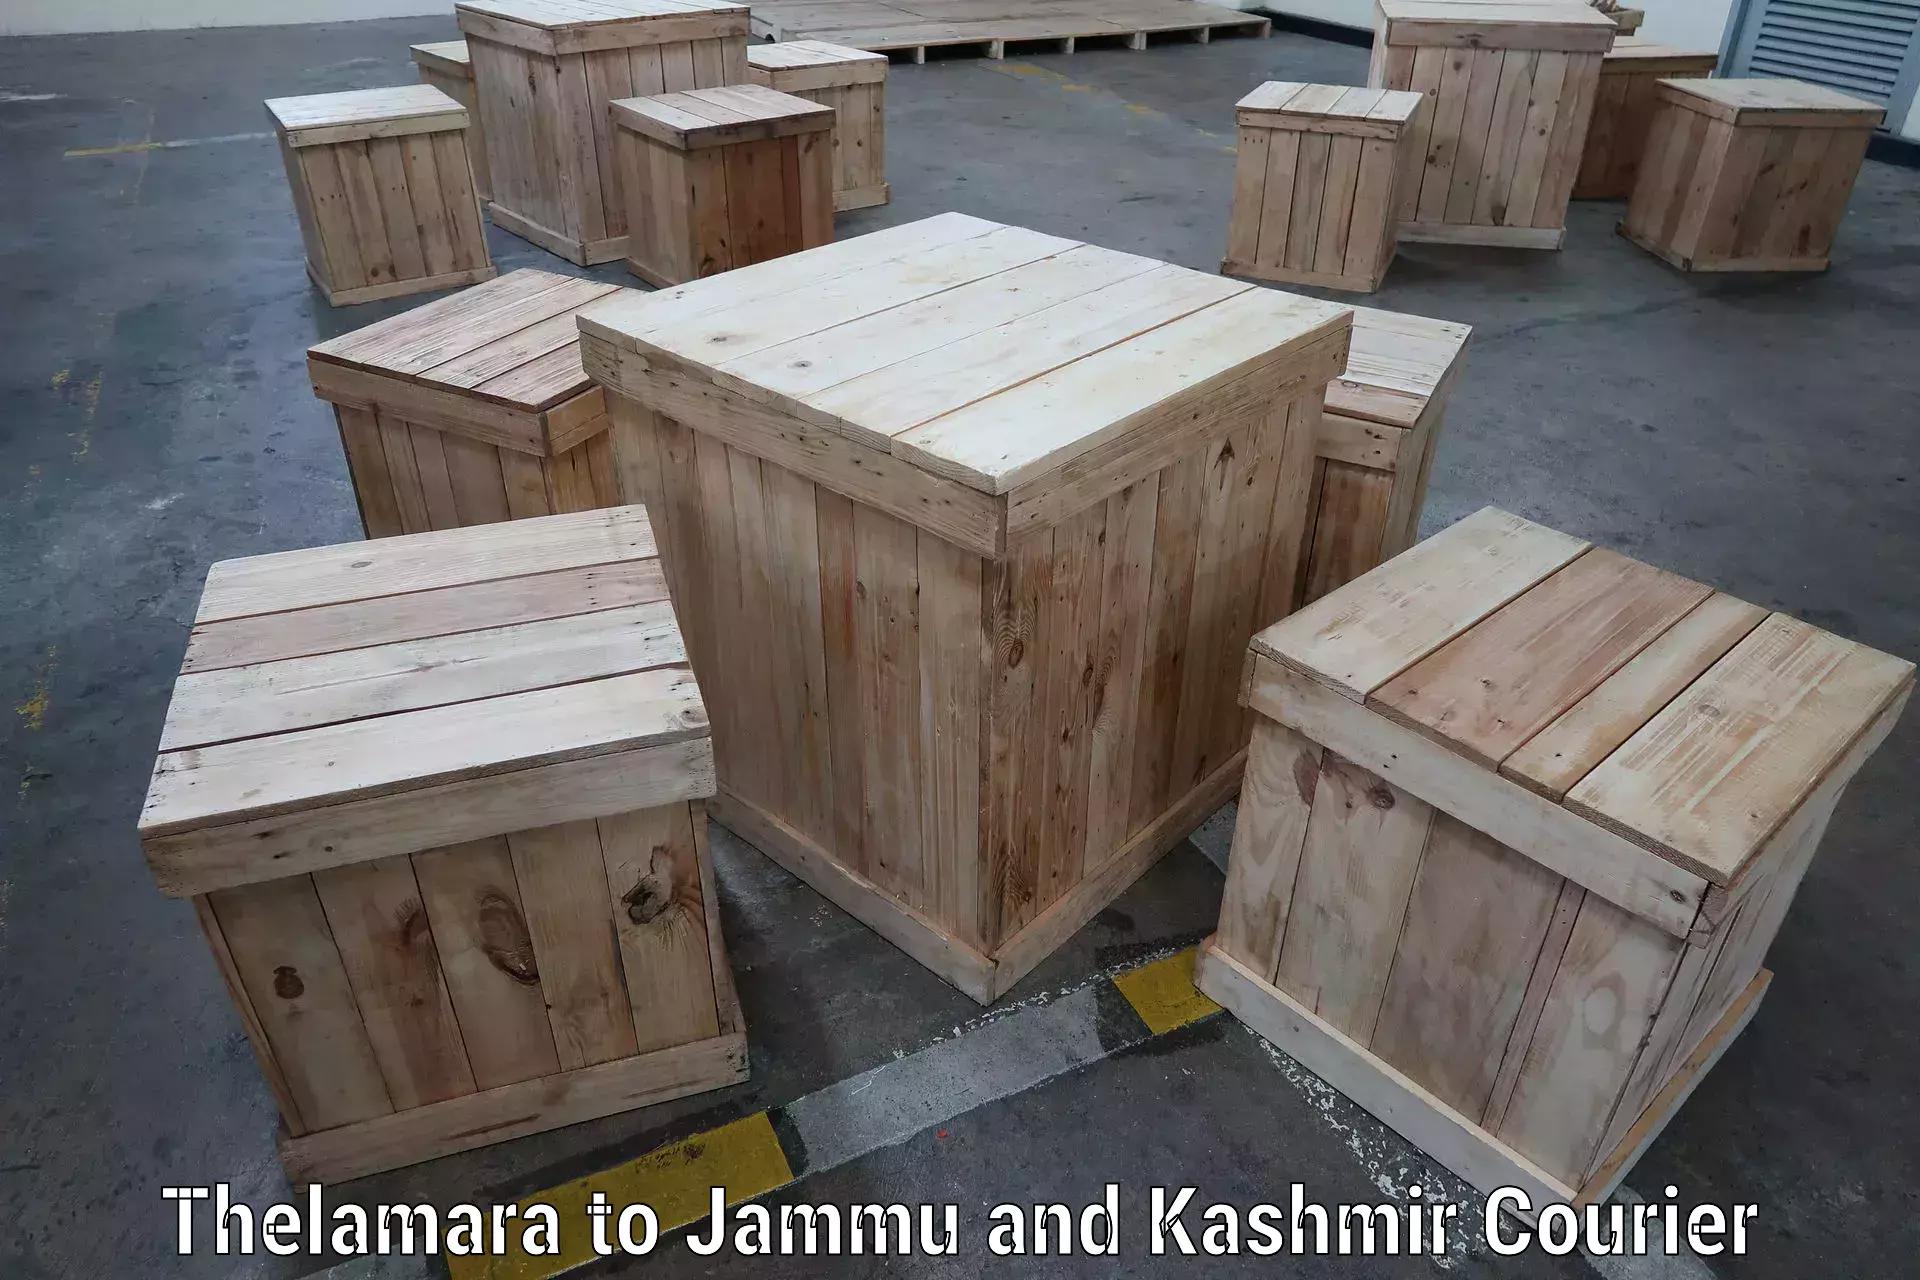 Full-service courier options Thelamara to Pulwama